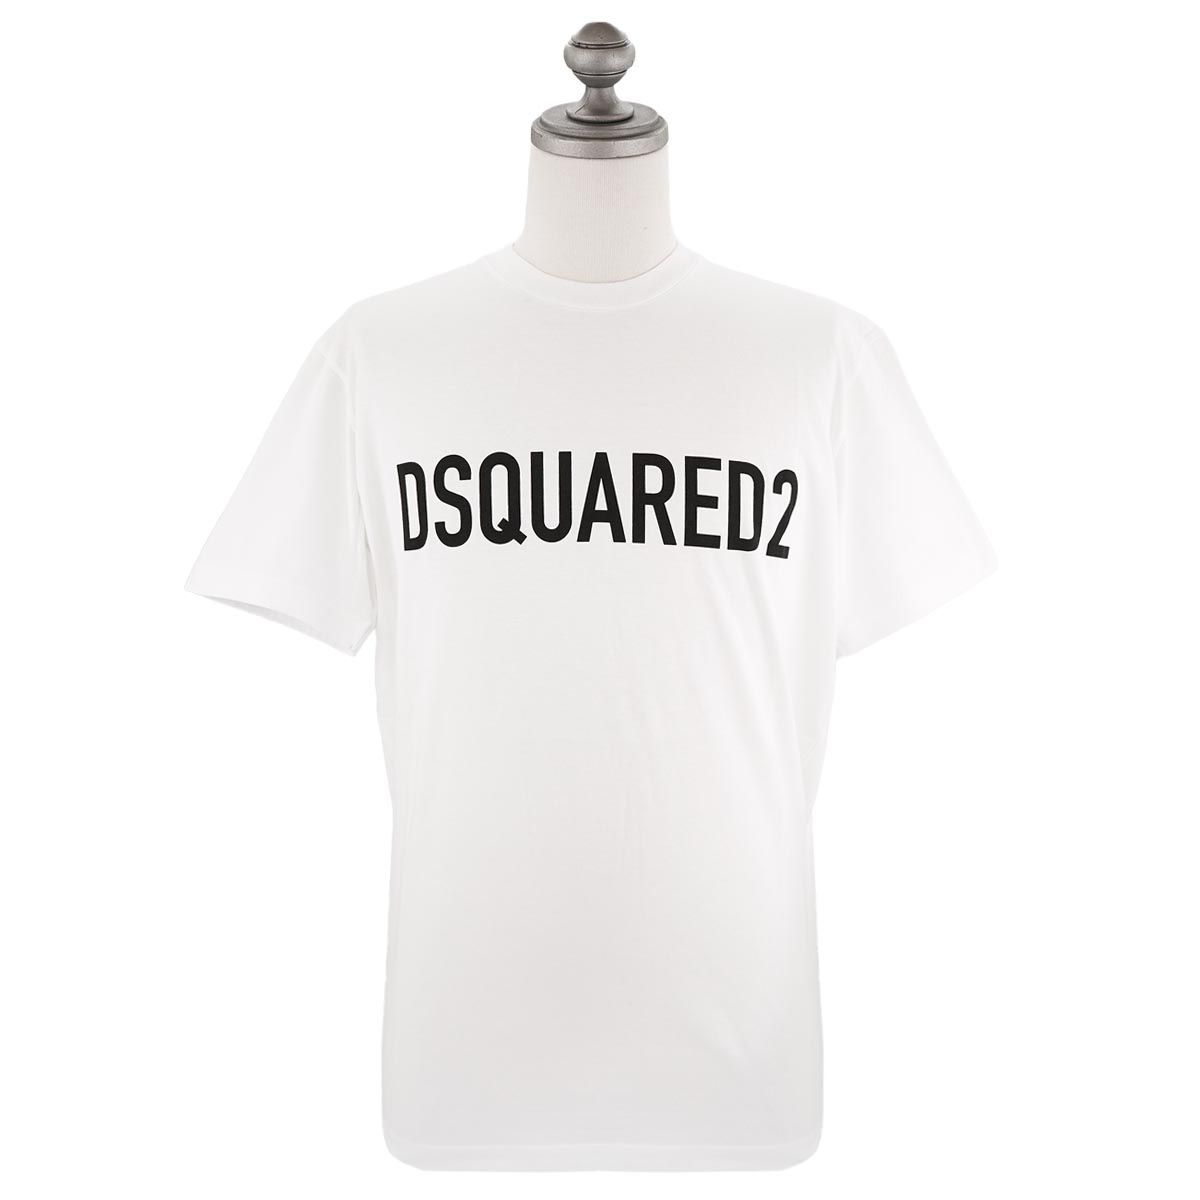 DSQUARED2 ディースクエアード 半袖Tシャツ S74GD1126 S24321 COOL T ...